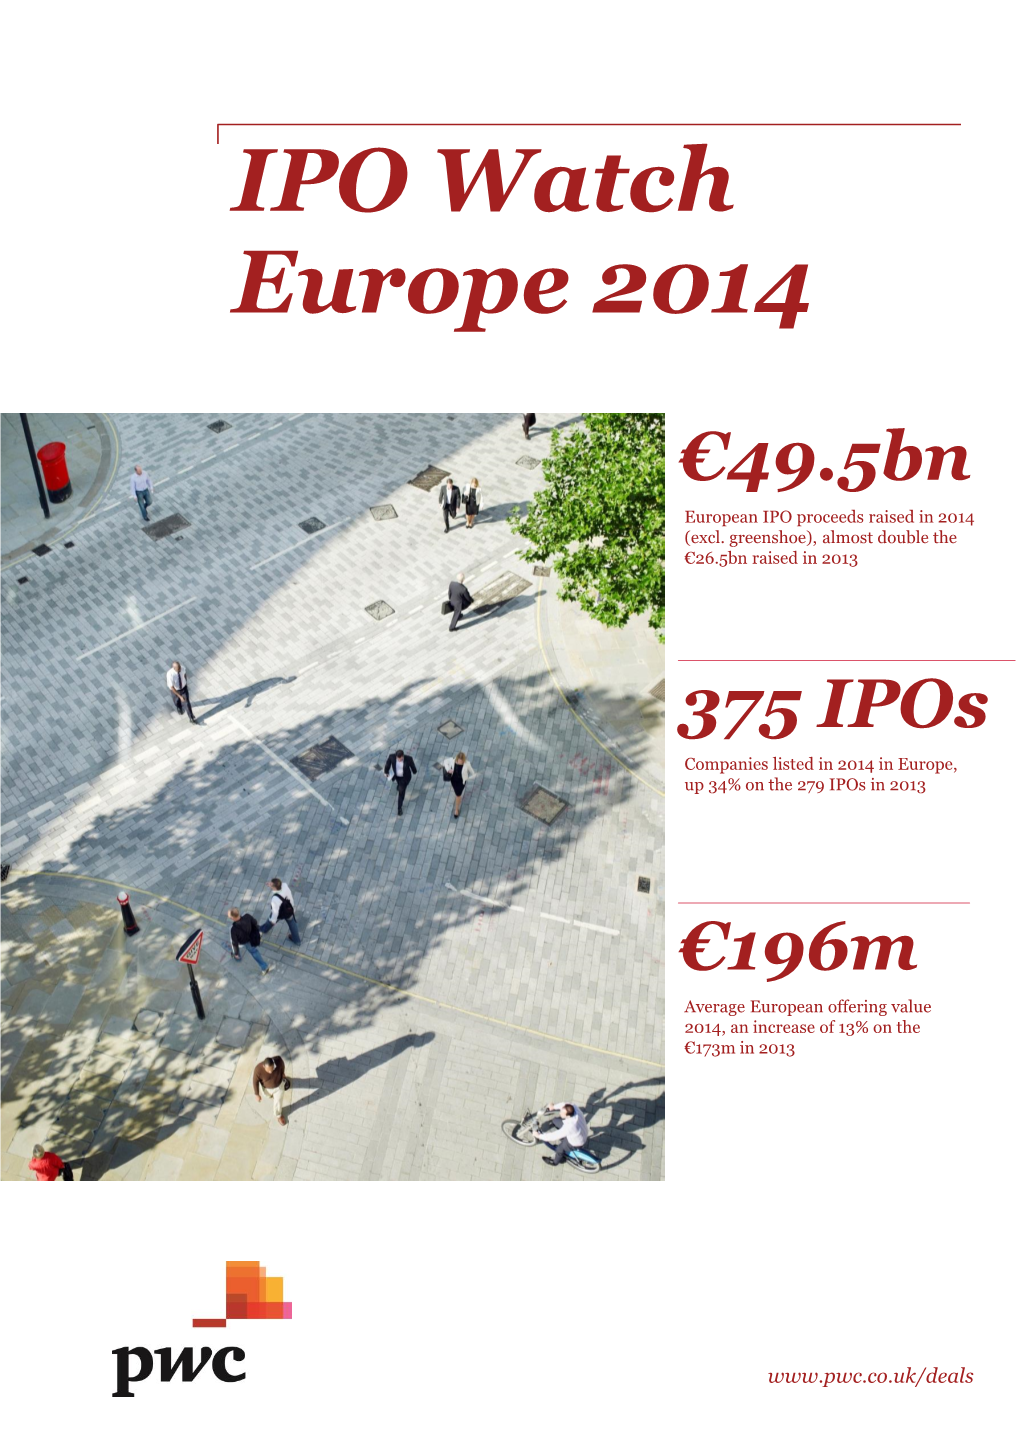 IPO Watch Europe 2014